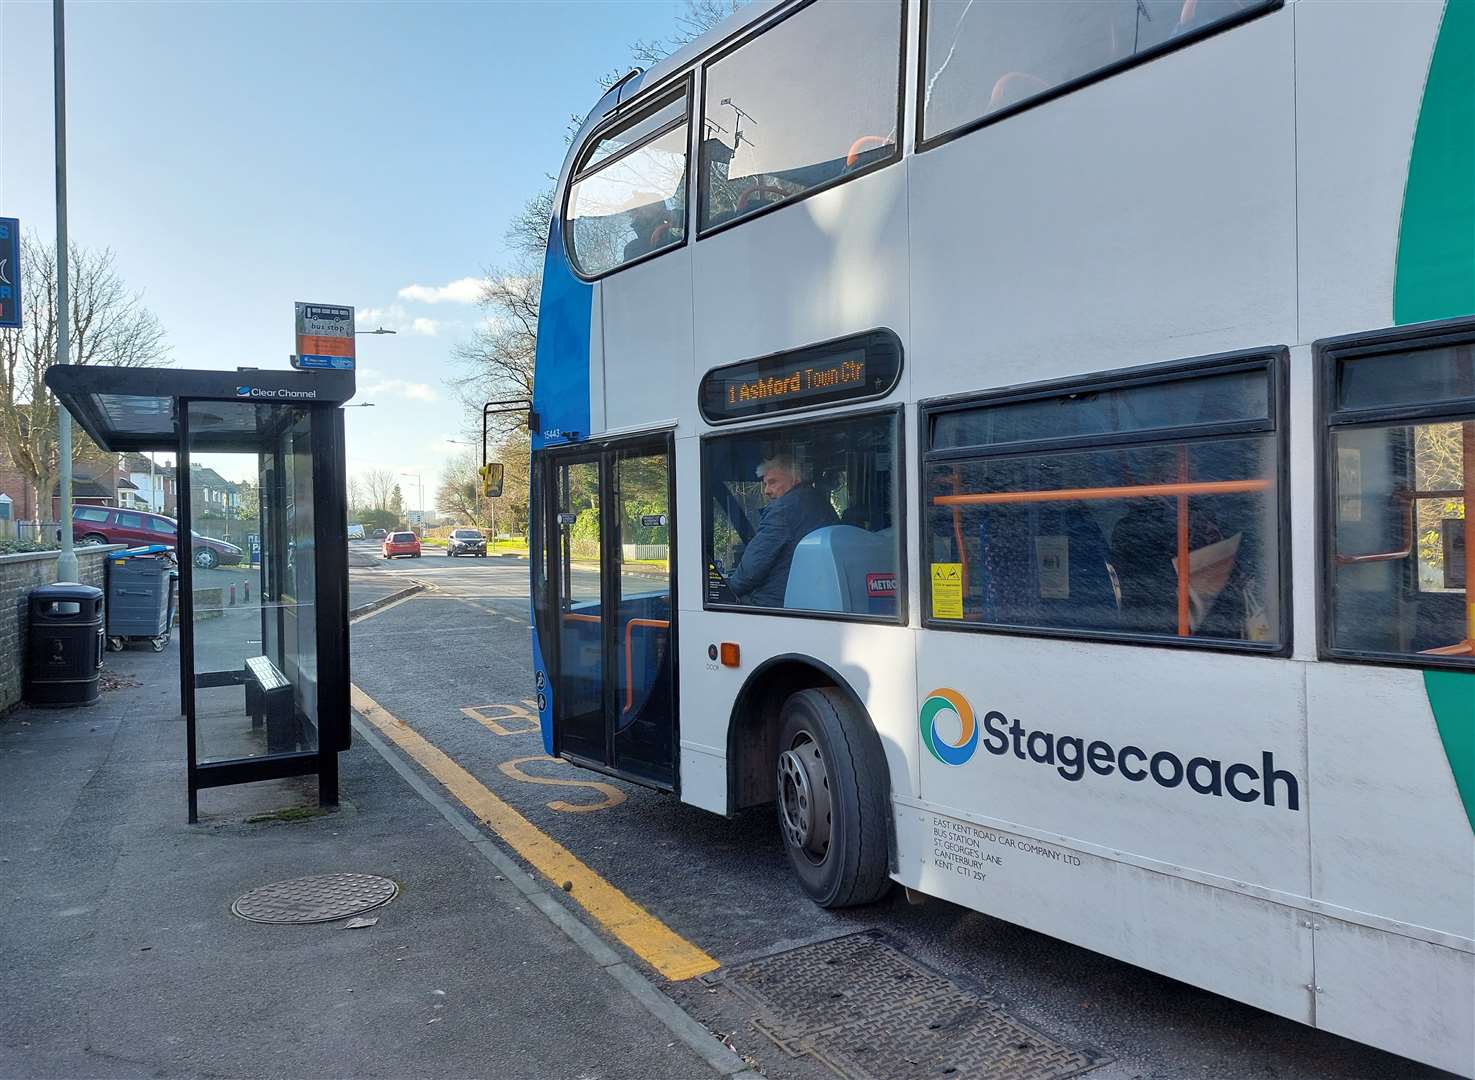 Traders say buses often only use half of the space available